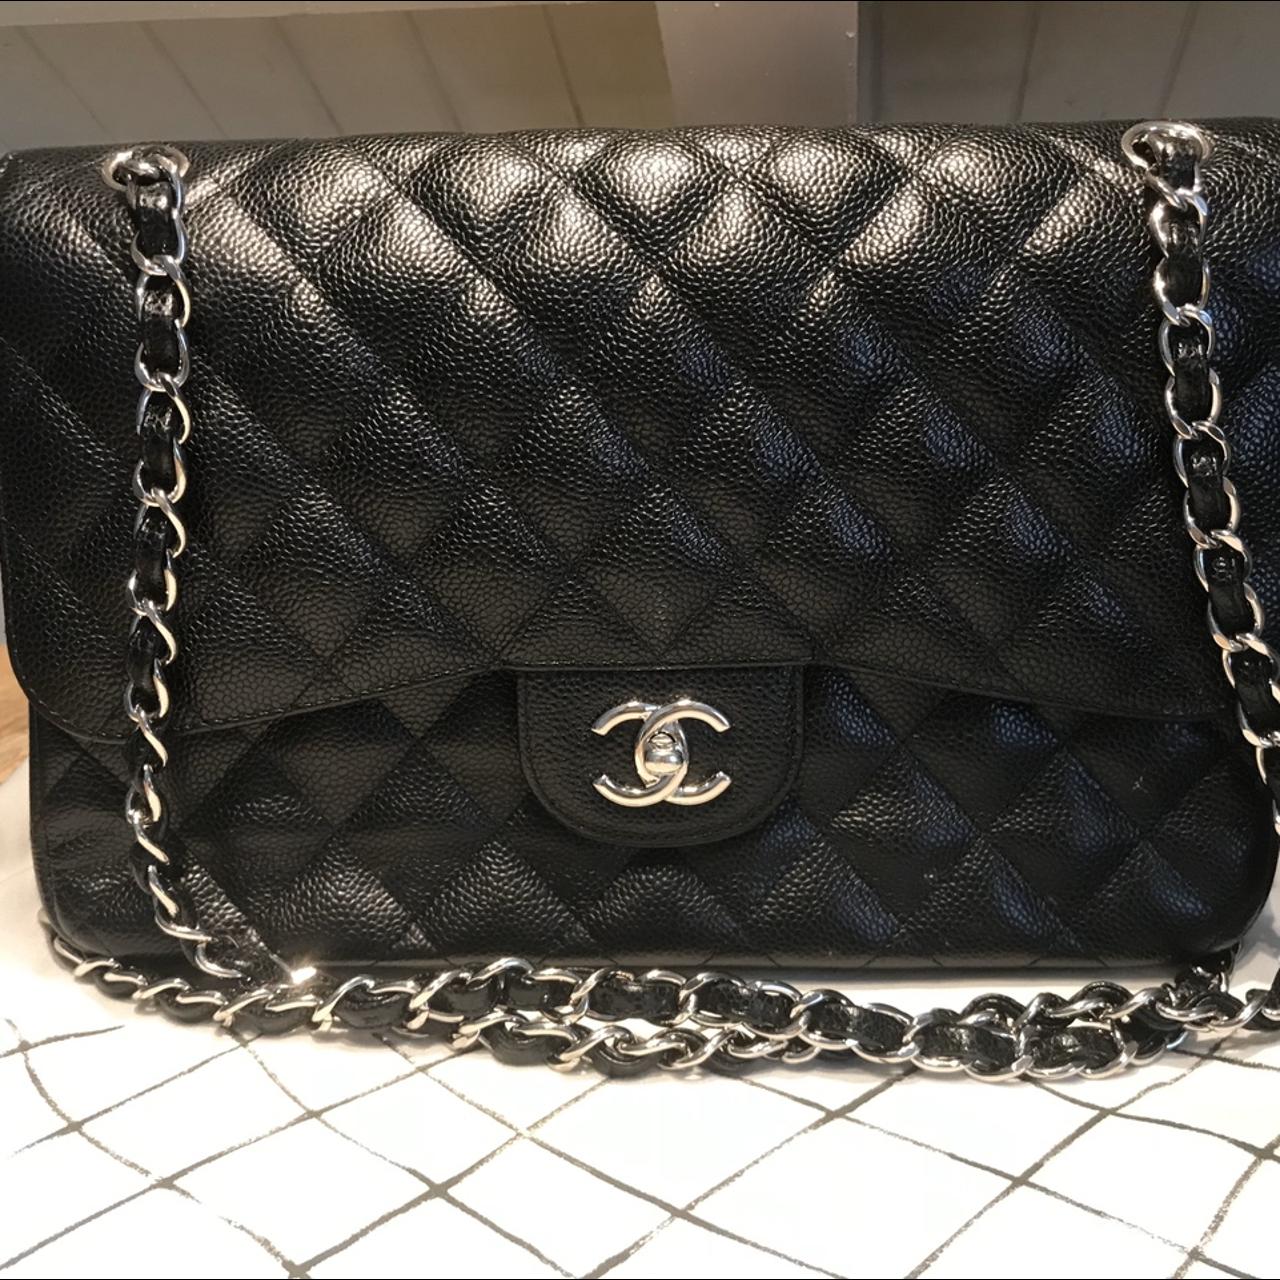 Chanel 2.55 Smooth Copper Lambskin Bag